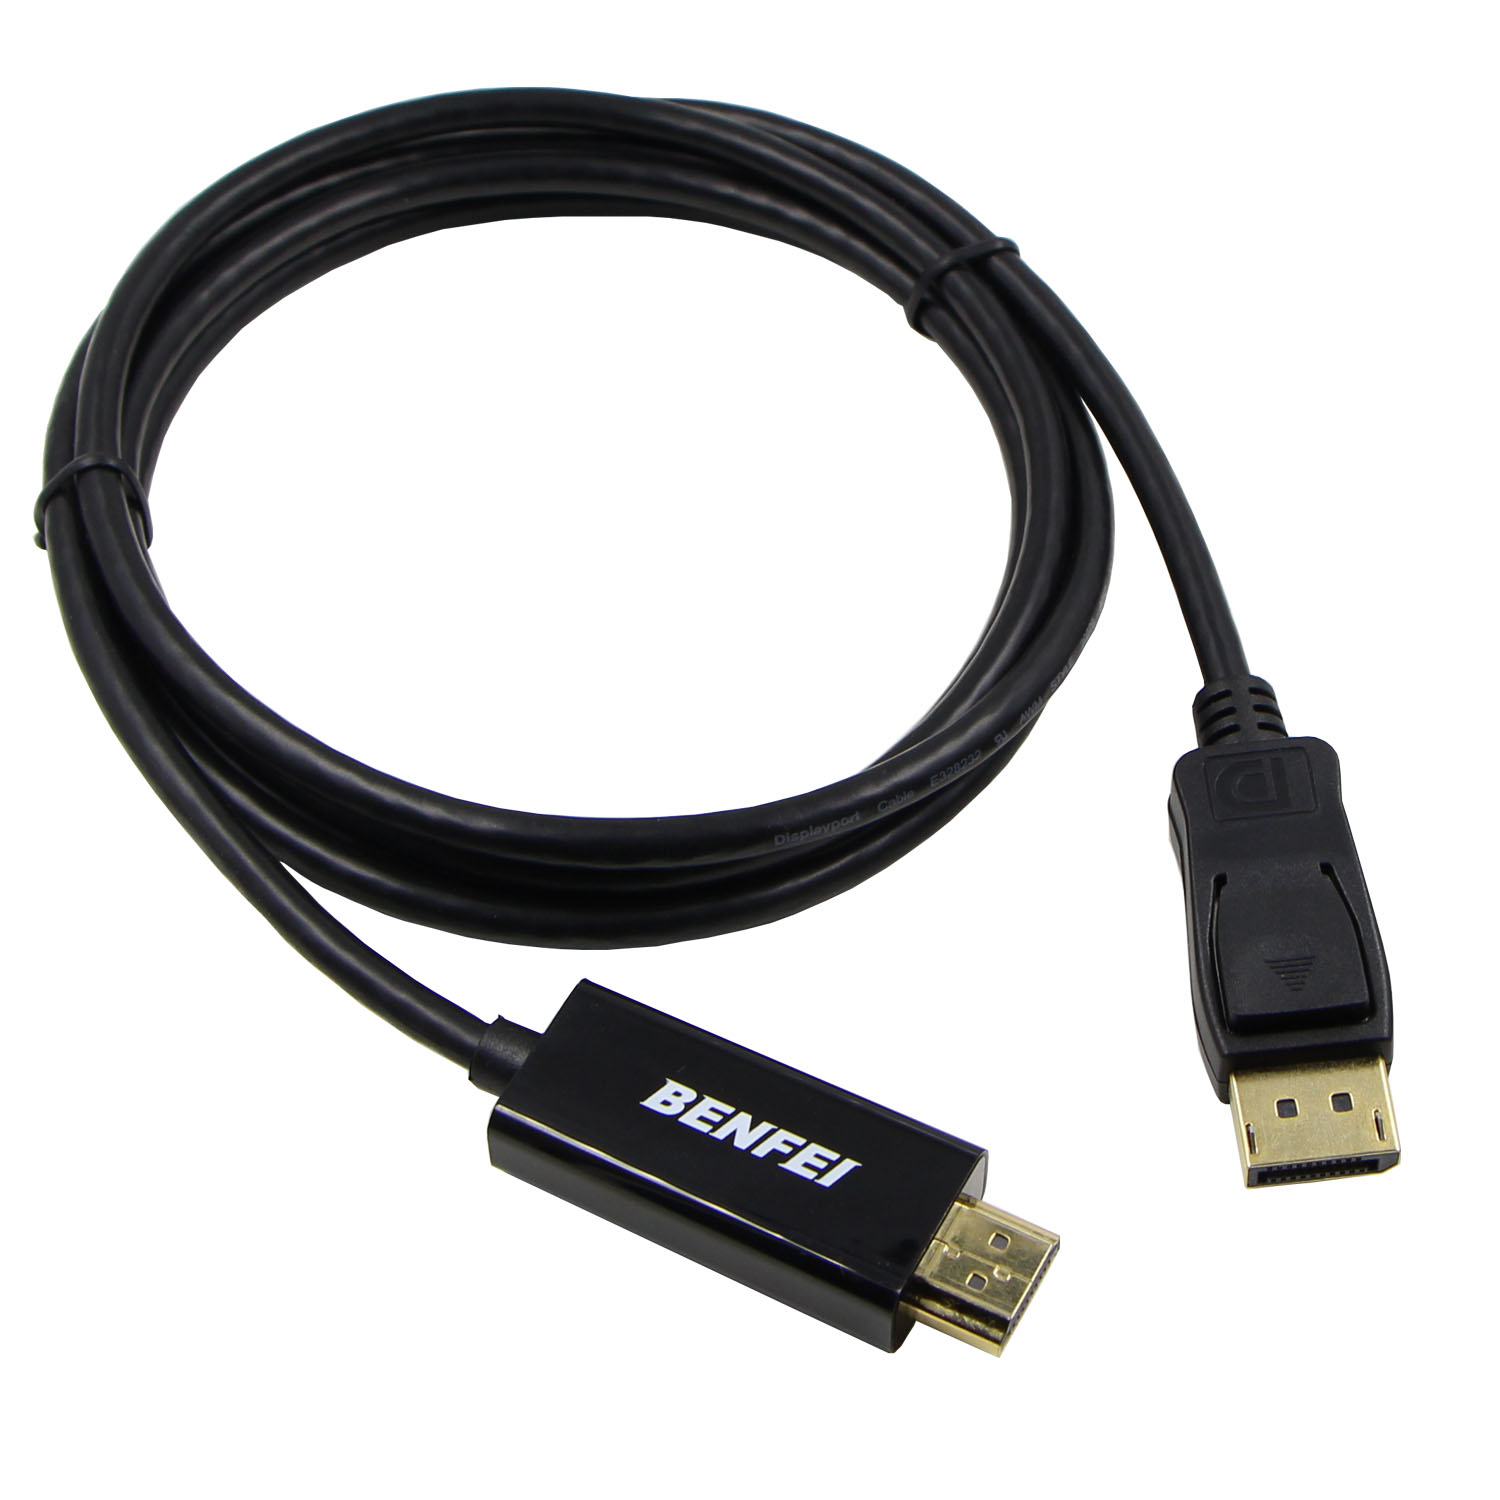 BENFEI DisplayPort to DisplayPort 6 Feet Cable, DP to DP Male to Male Cable  Gold-Plated Cord, Supports 4K@60Hz, 2K@165Hz Compatible for Lenovo, Dell